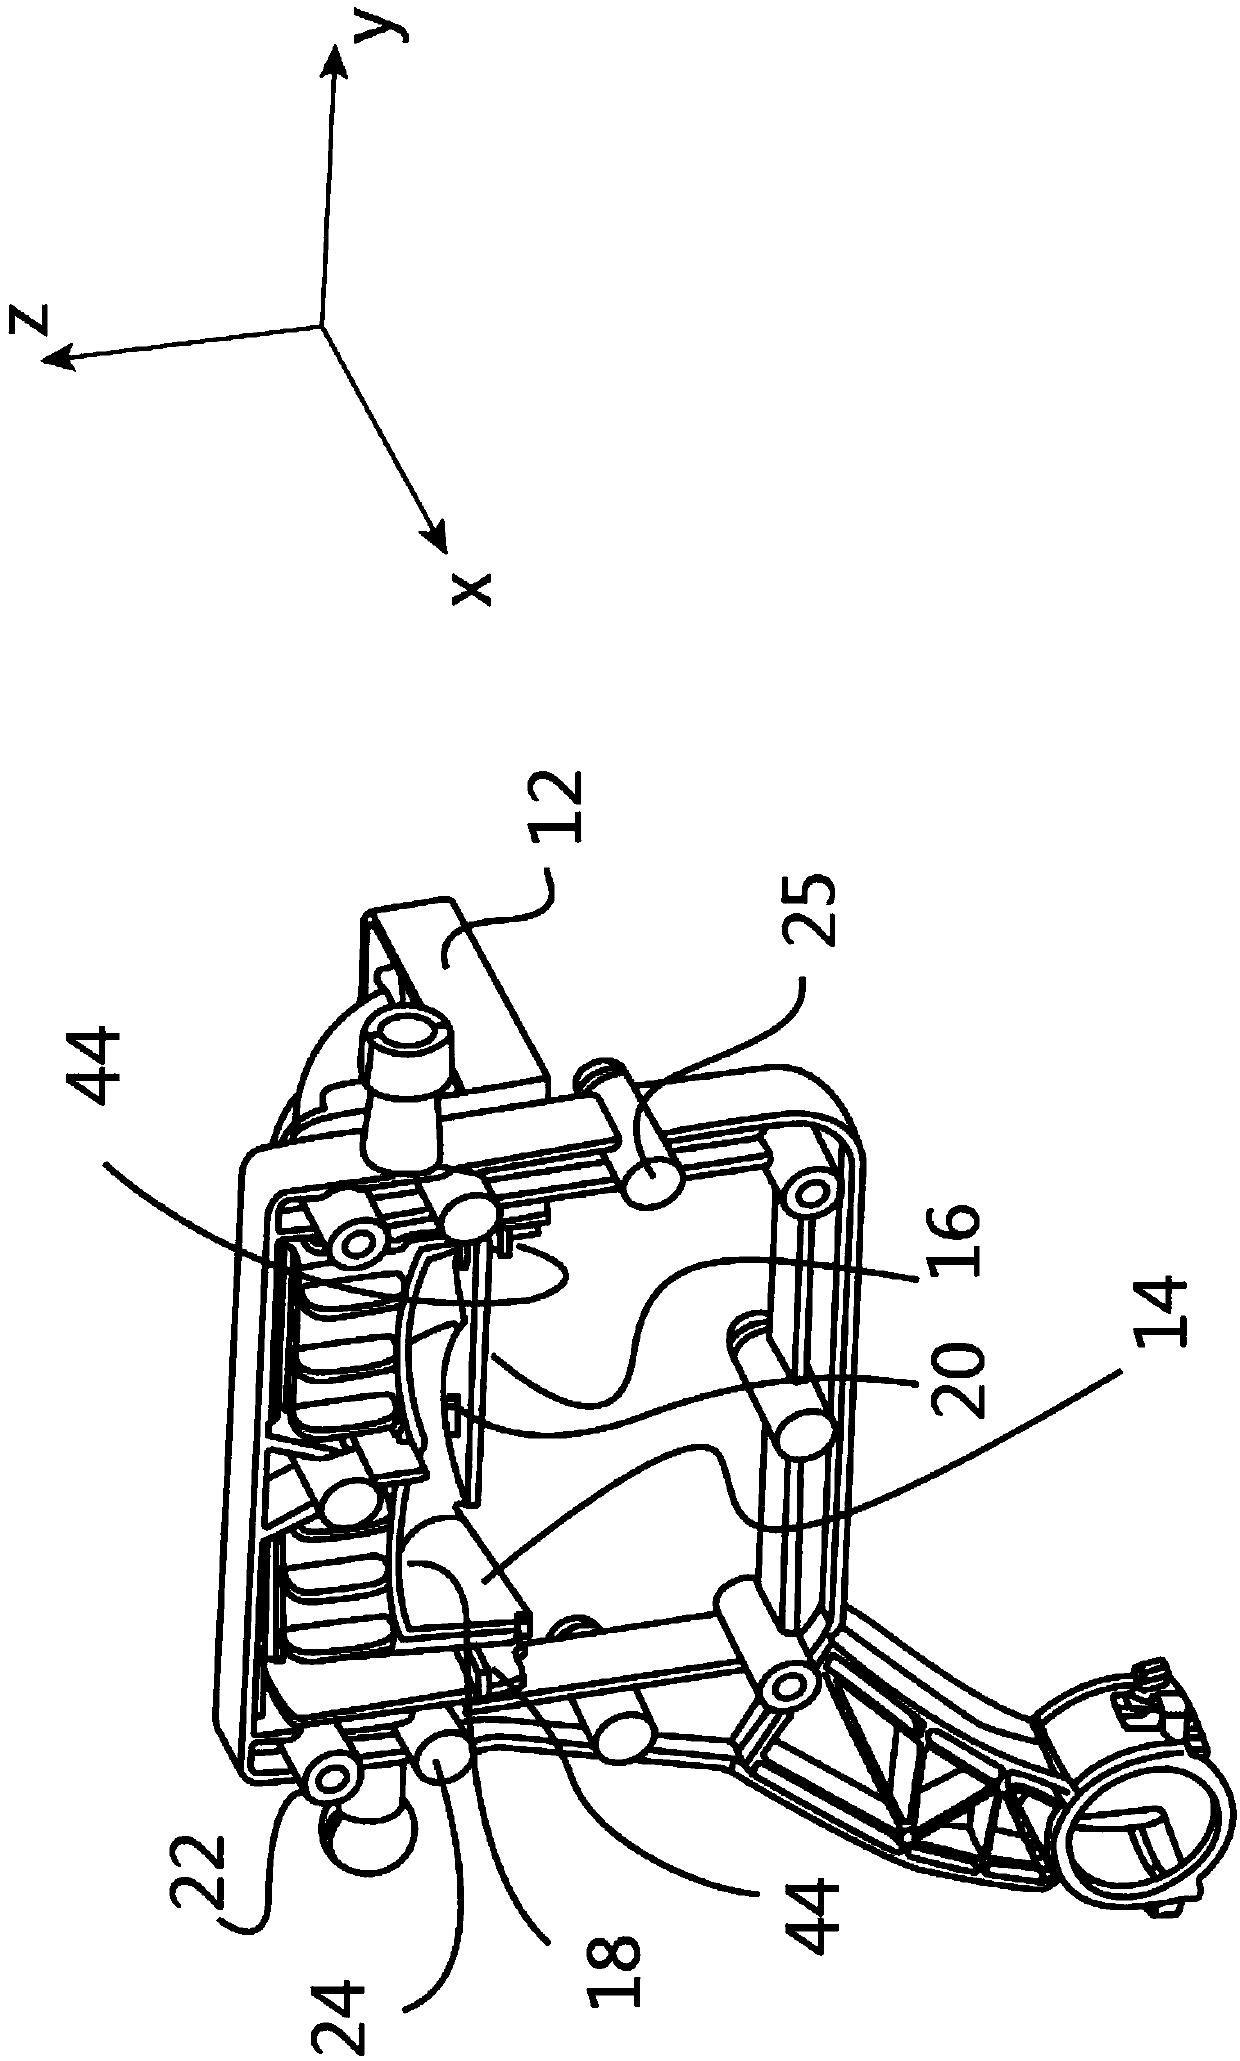 Multi-component reflector for light module of a motor vehicle headlight